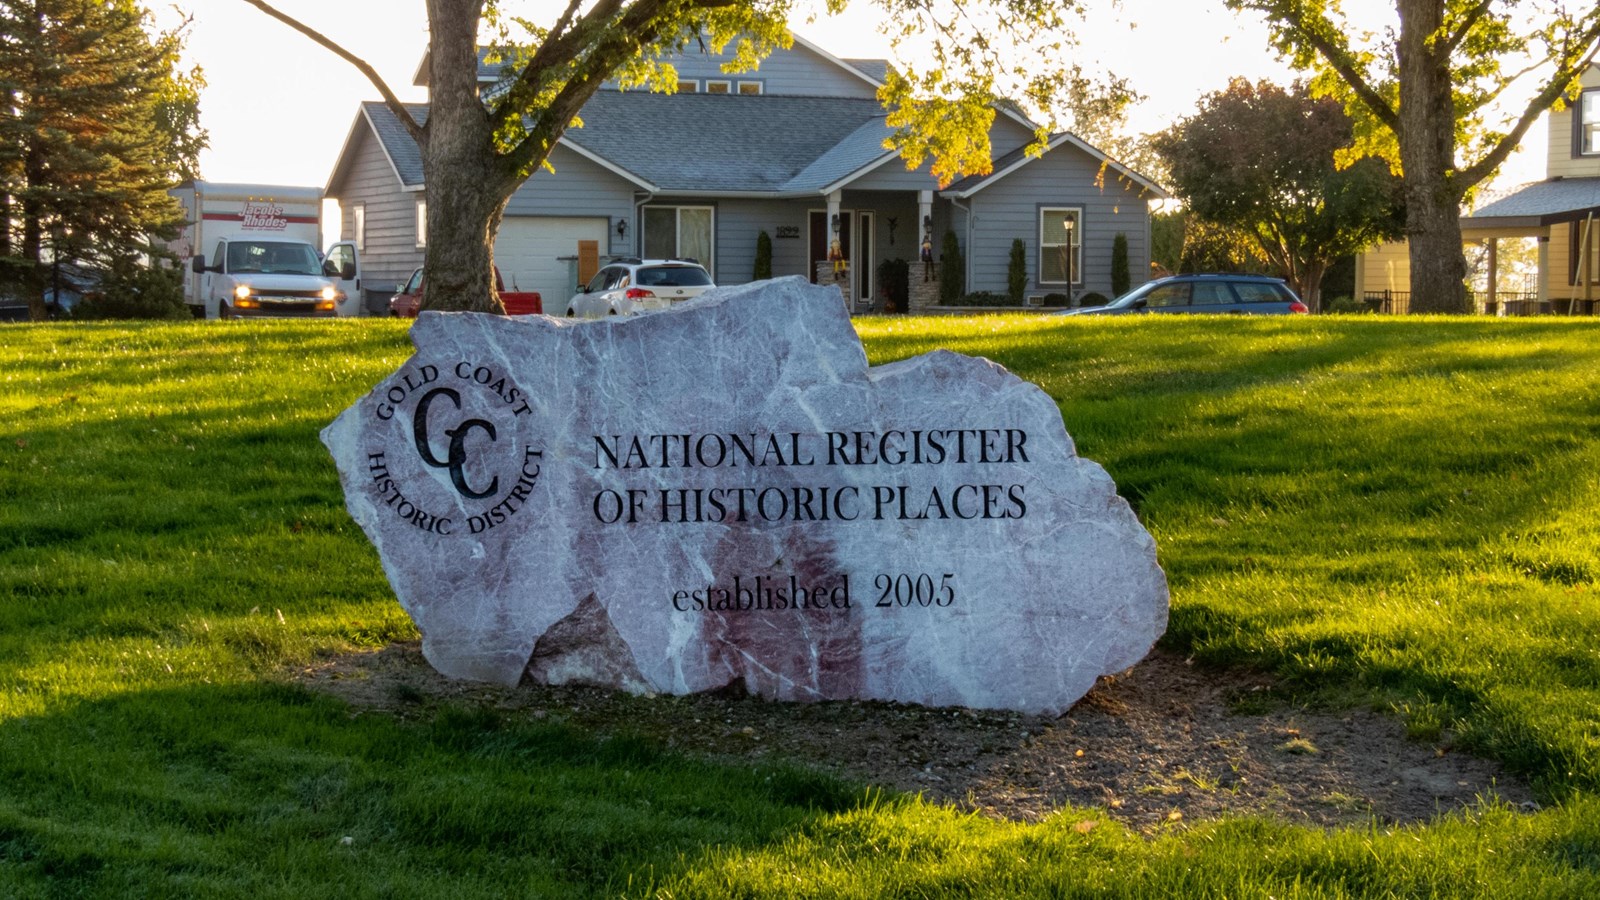 Color photograph of a rock with writing on it laying on a green lawn in front of suburban homes